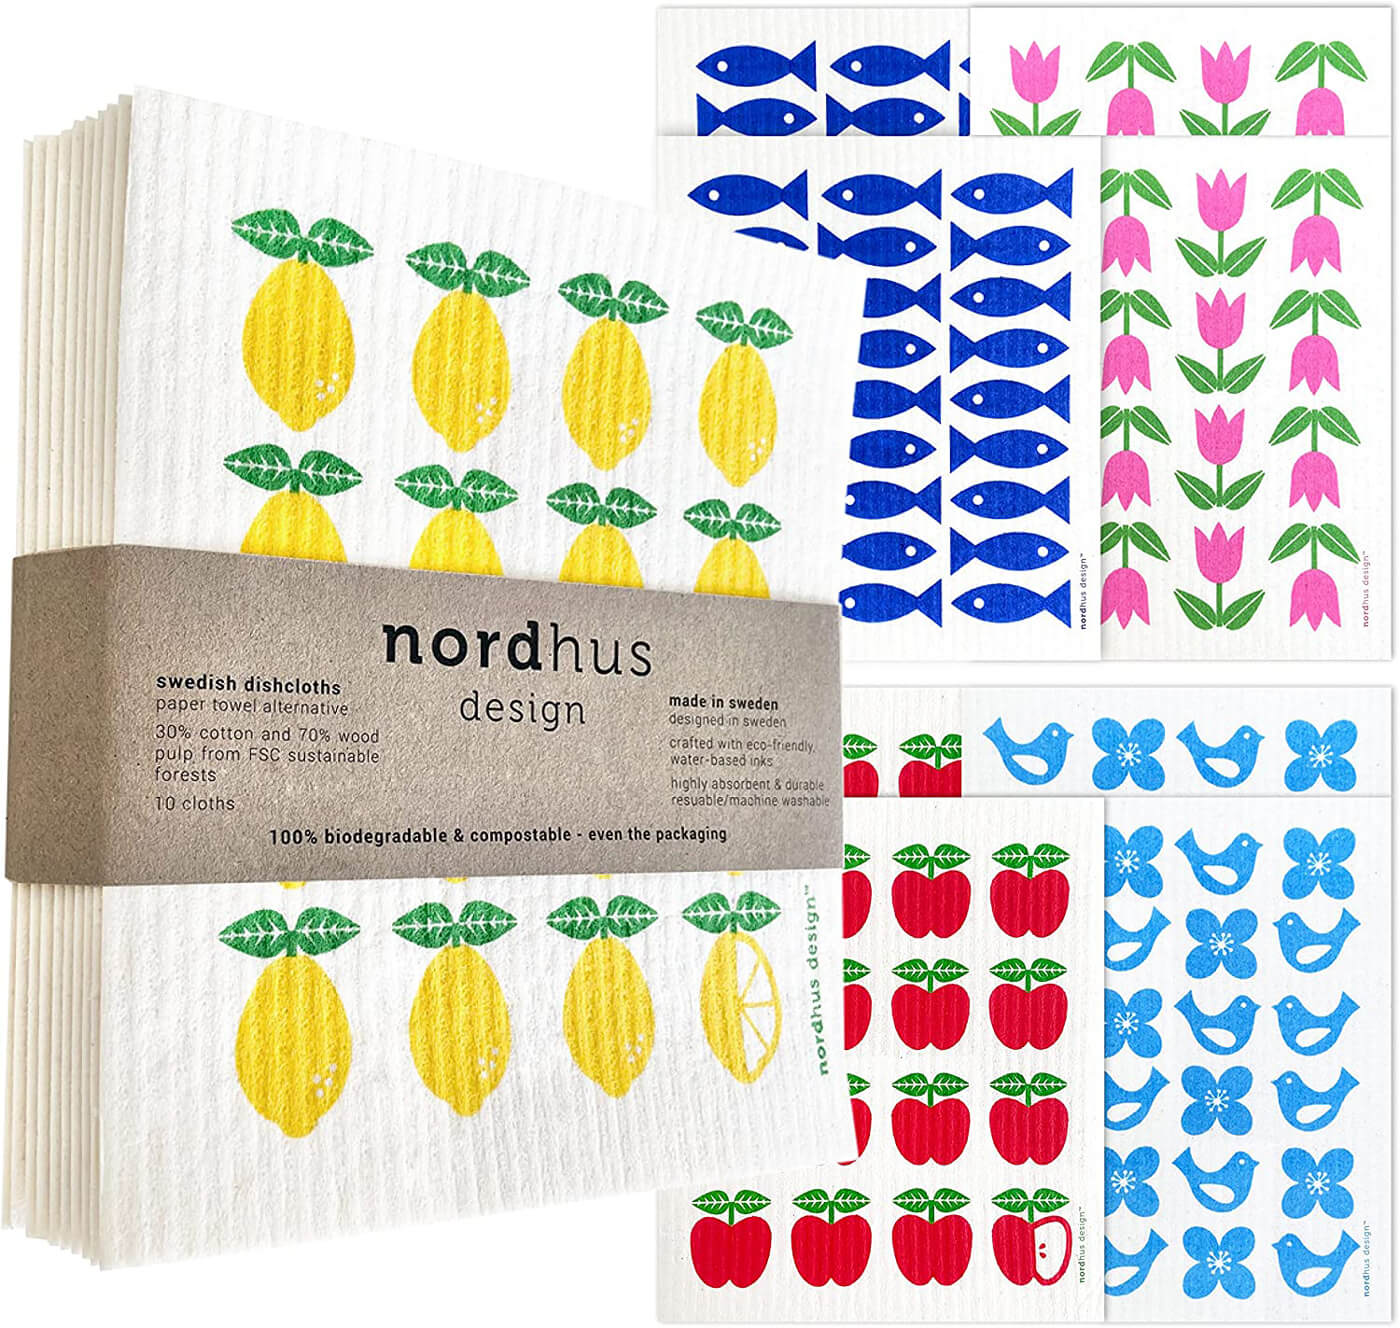 Swedish Dishcloths Reusable Compostable Alternative to Paper Towels